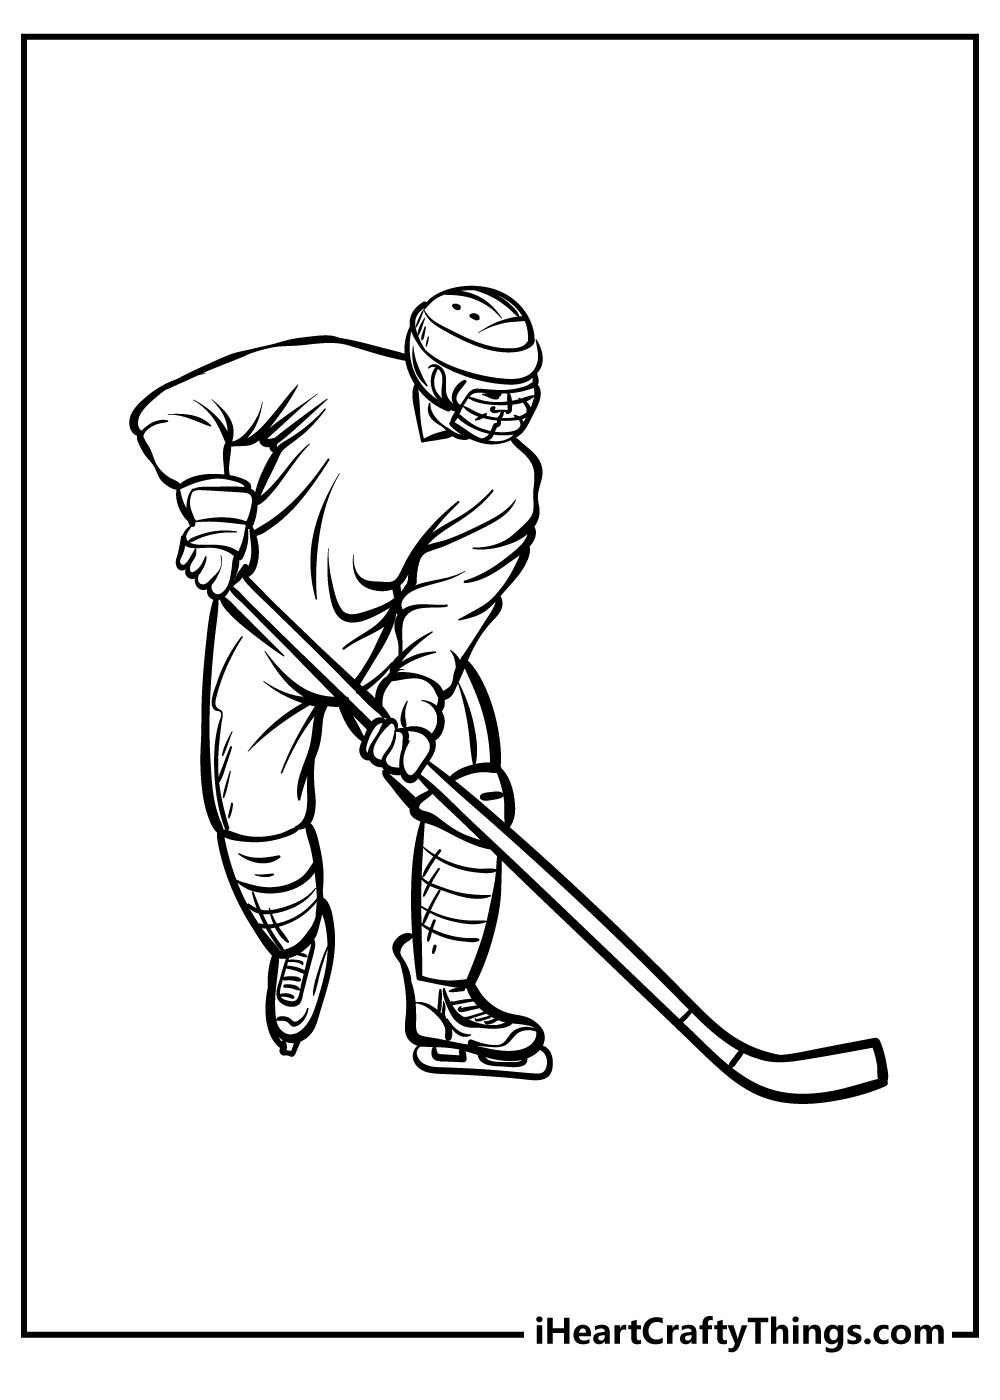 Hockey Easy Coloring Pages